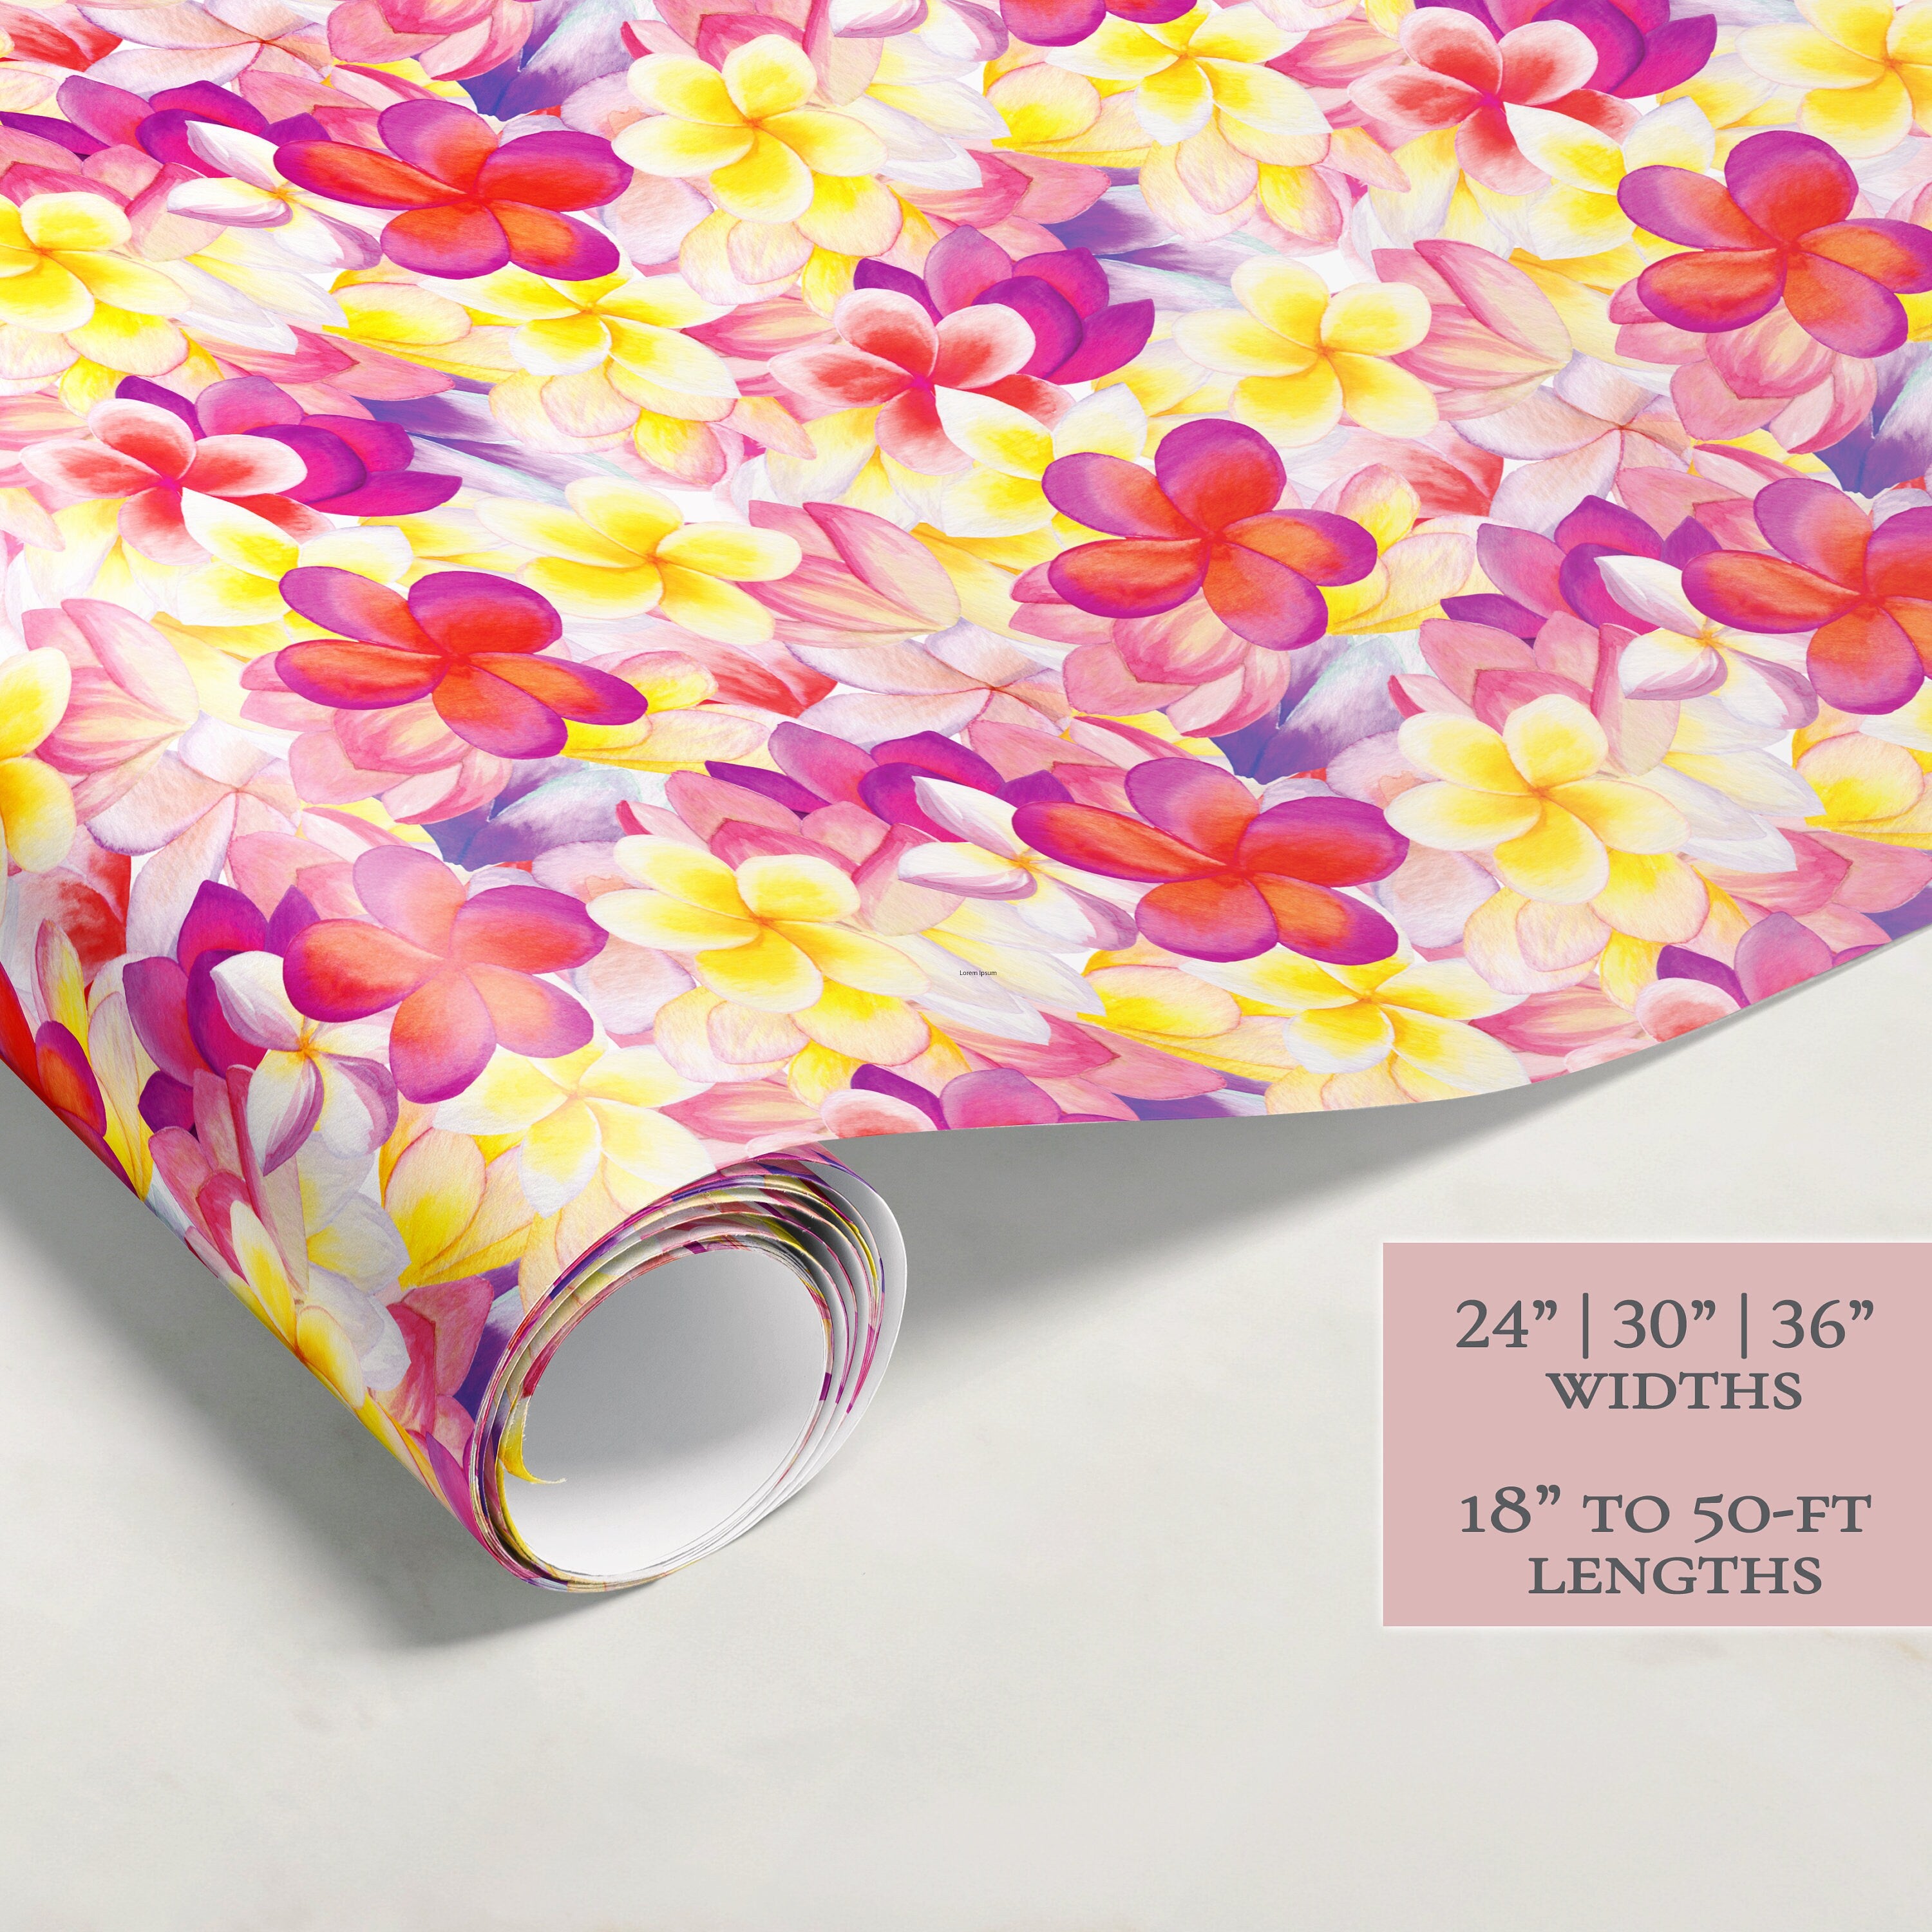 Plumeria Flower Wrapping Paper | Floral Gift Wrap | Wrapping Paper Rolls | Gift Wrap | Premium Gift Wrap| Hawaiian Gift Wrap